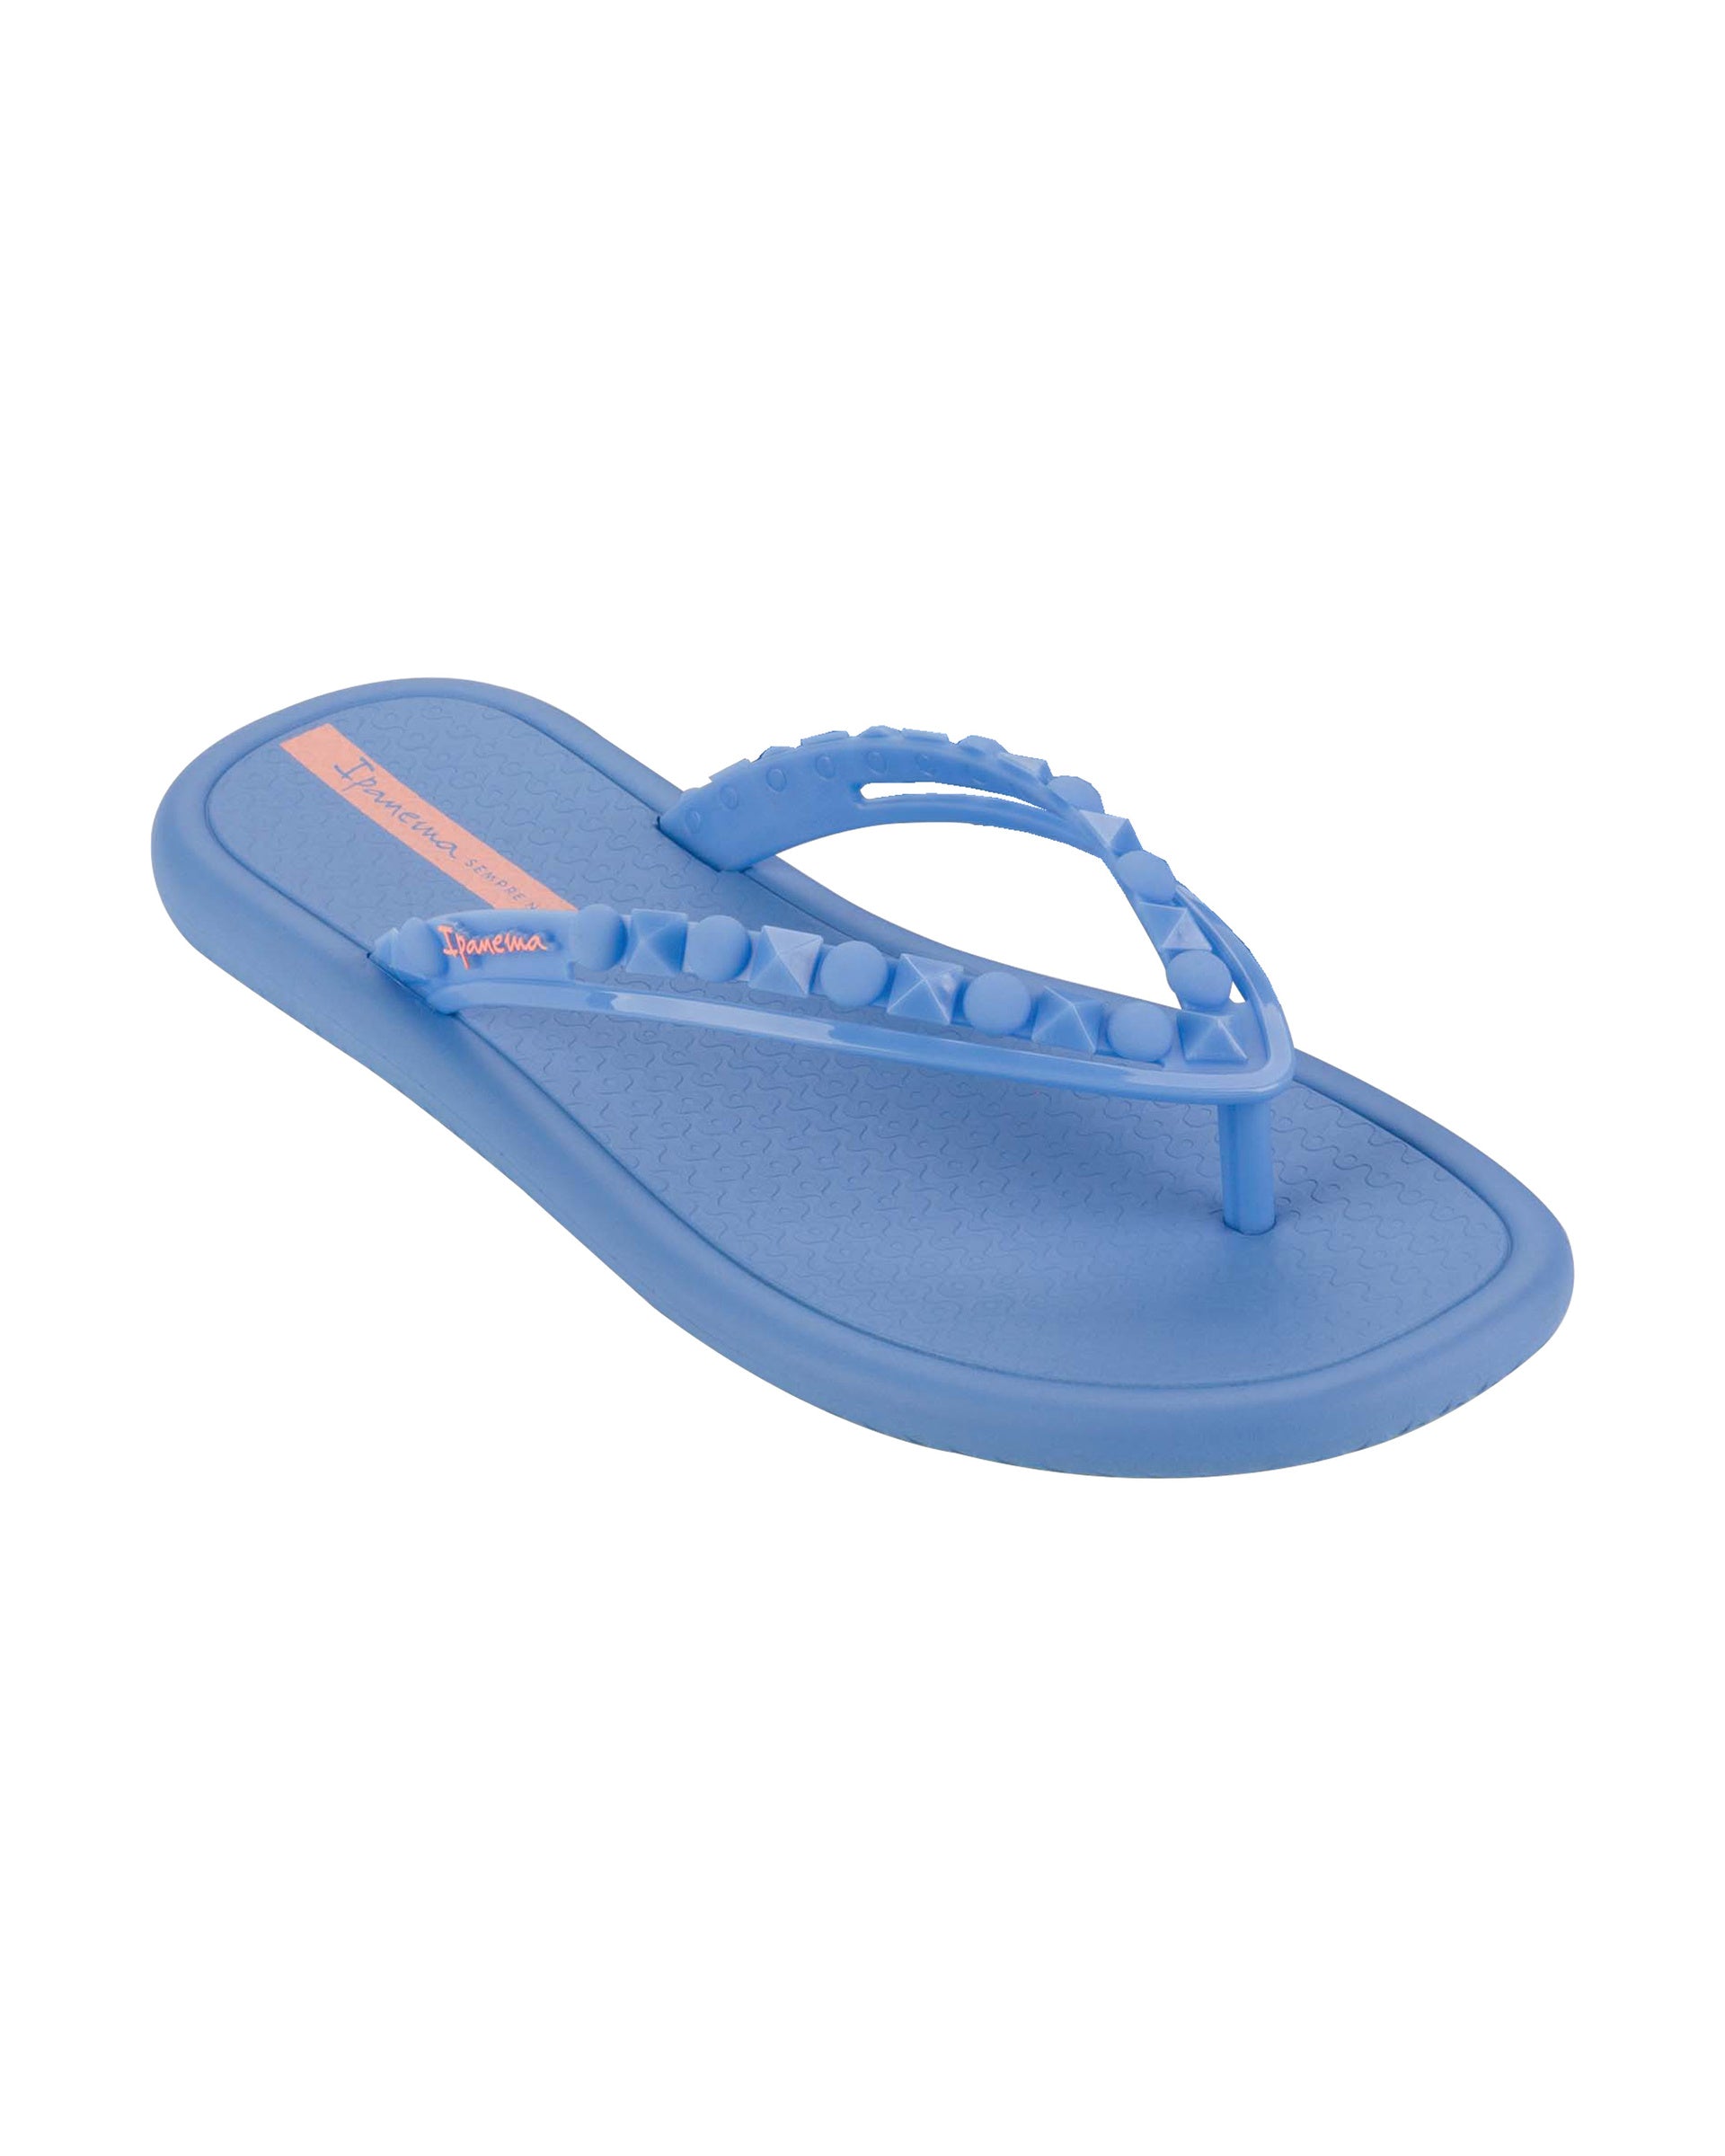 Angled view of a blue Ipanema Meu Sol women's flip flop with stud details on strap.